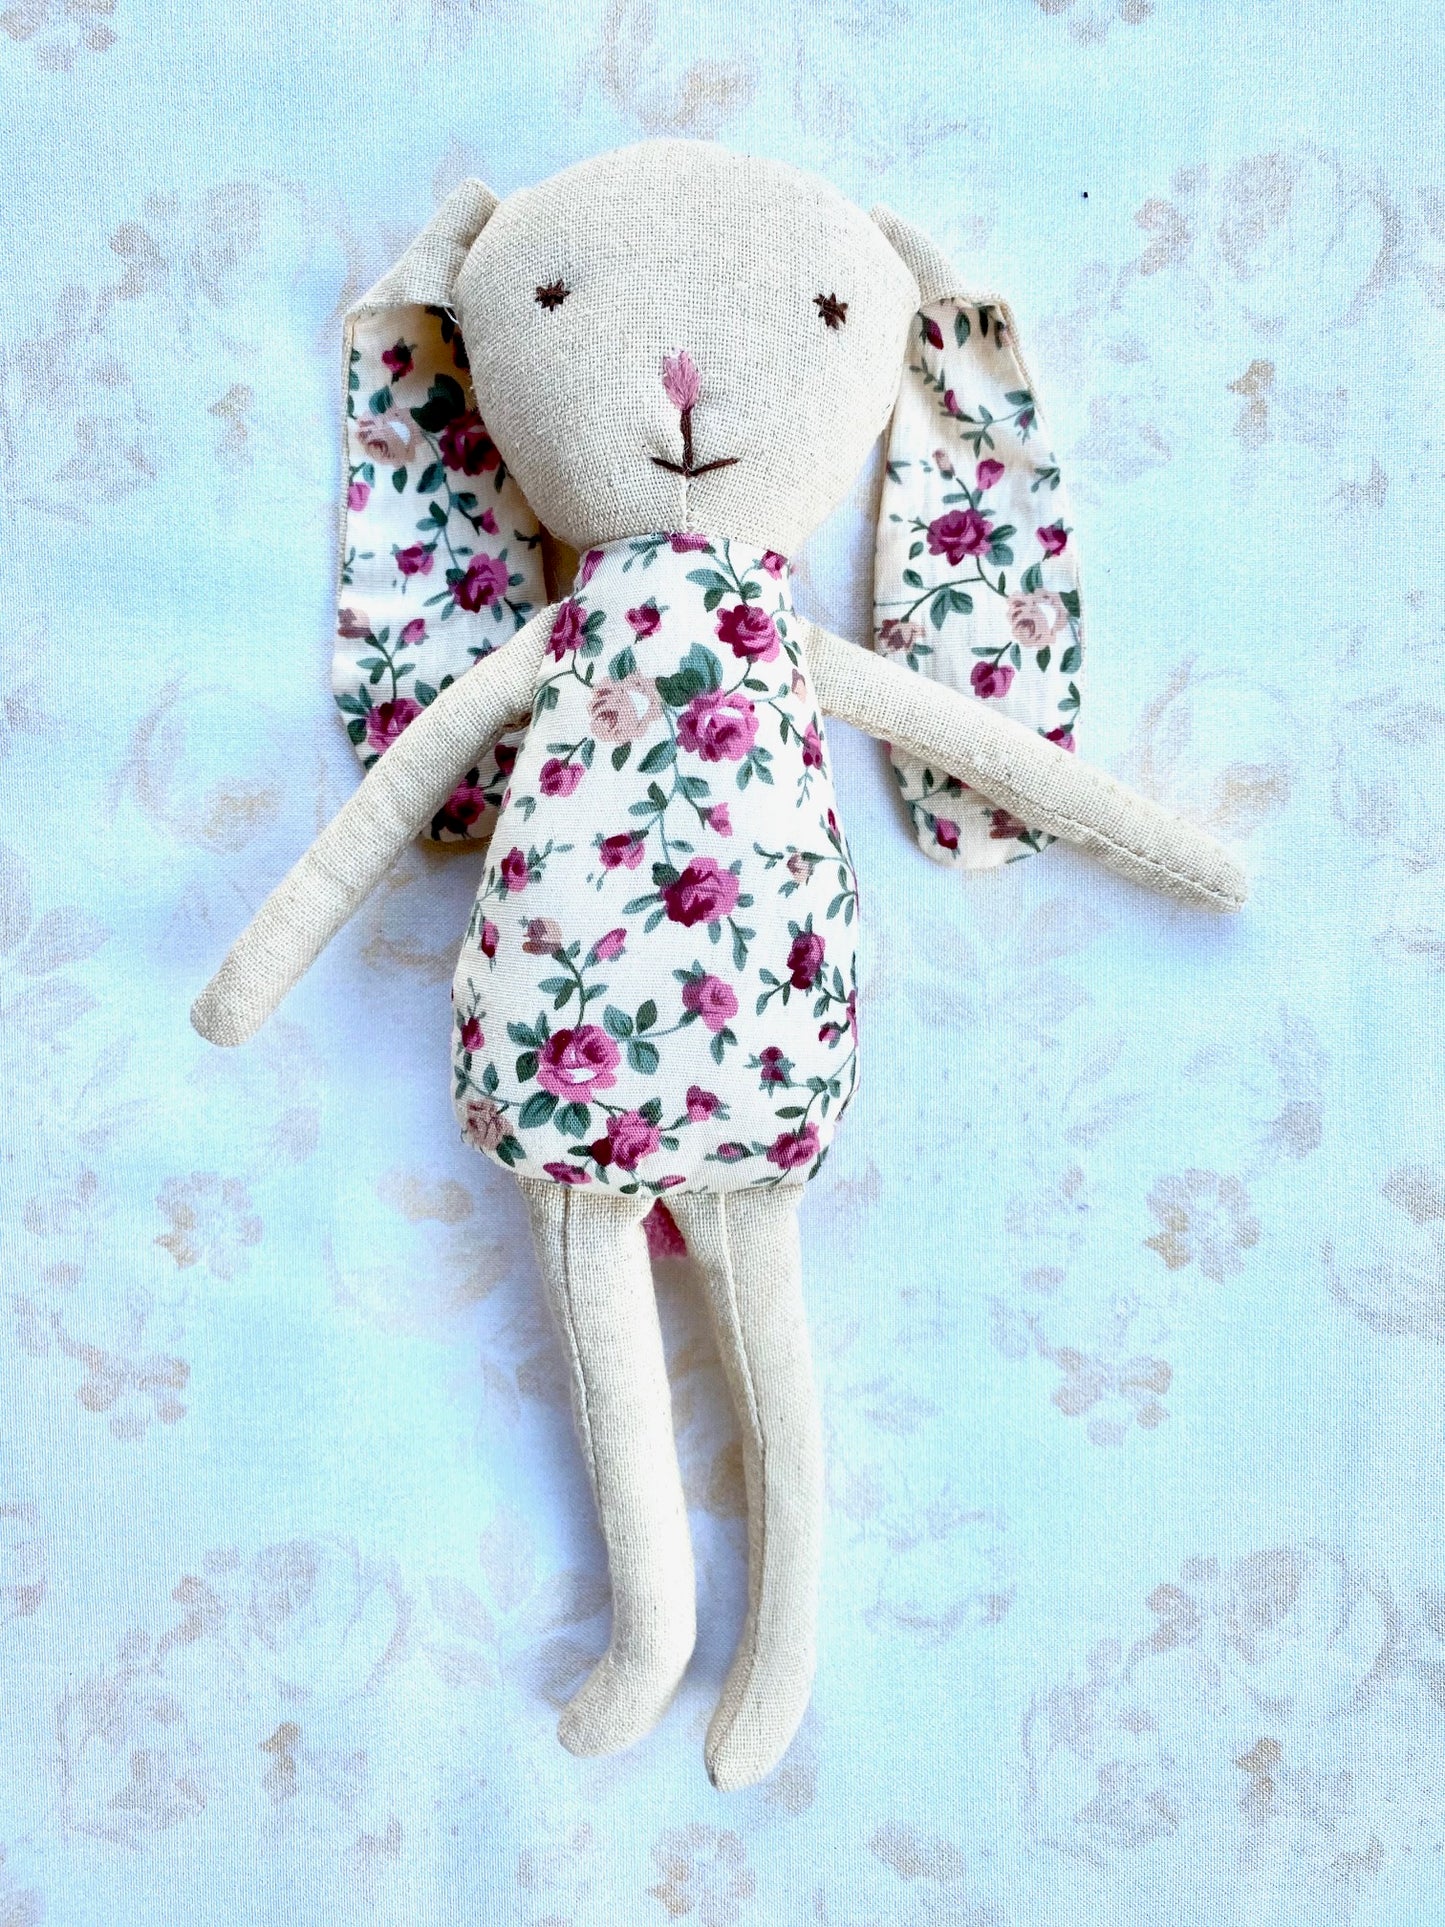 Rose Bunny Toy.  Pink roses.